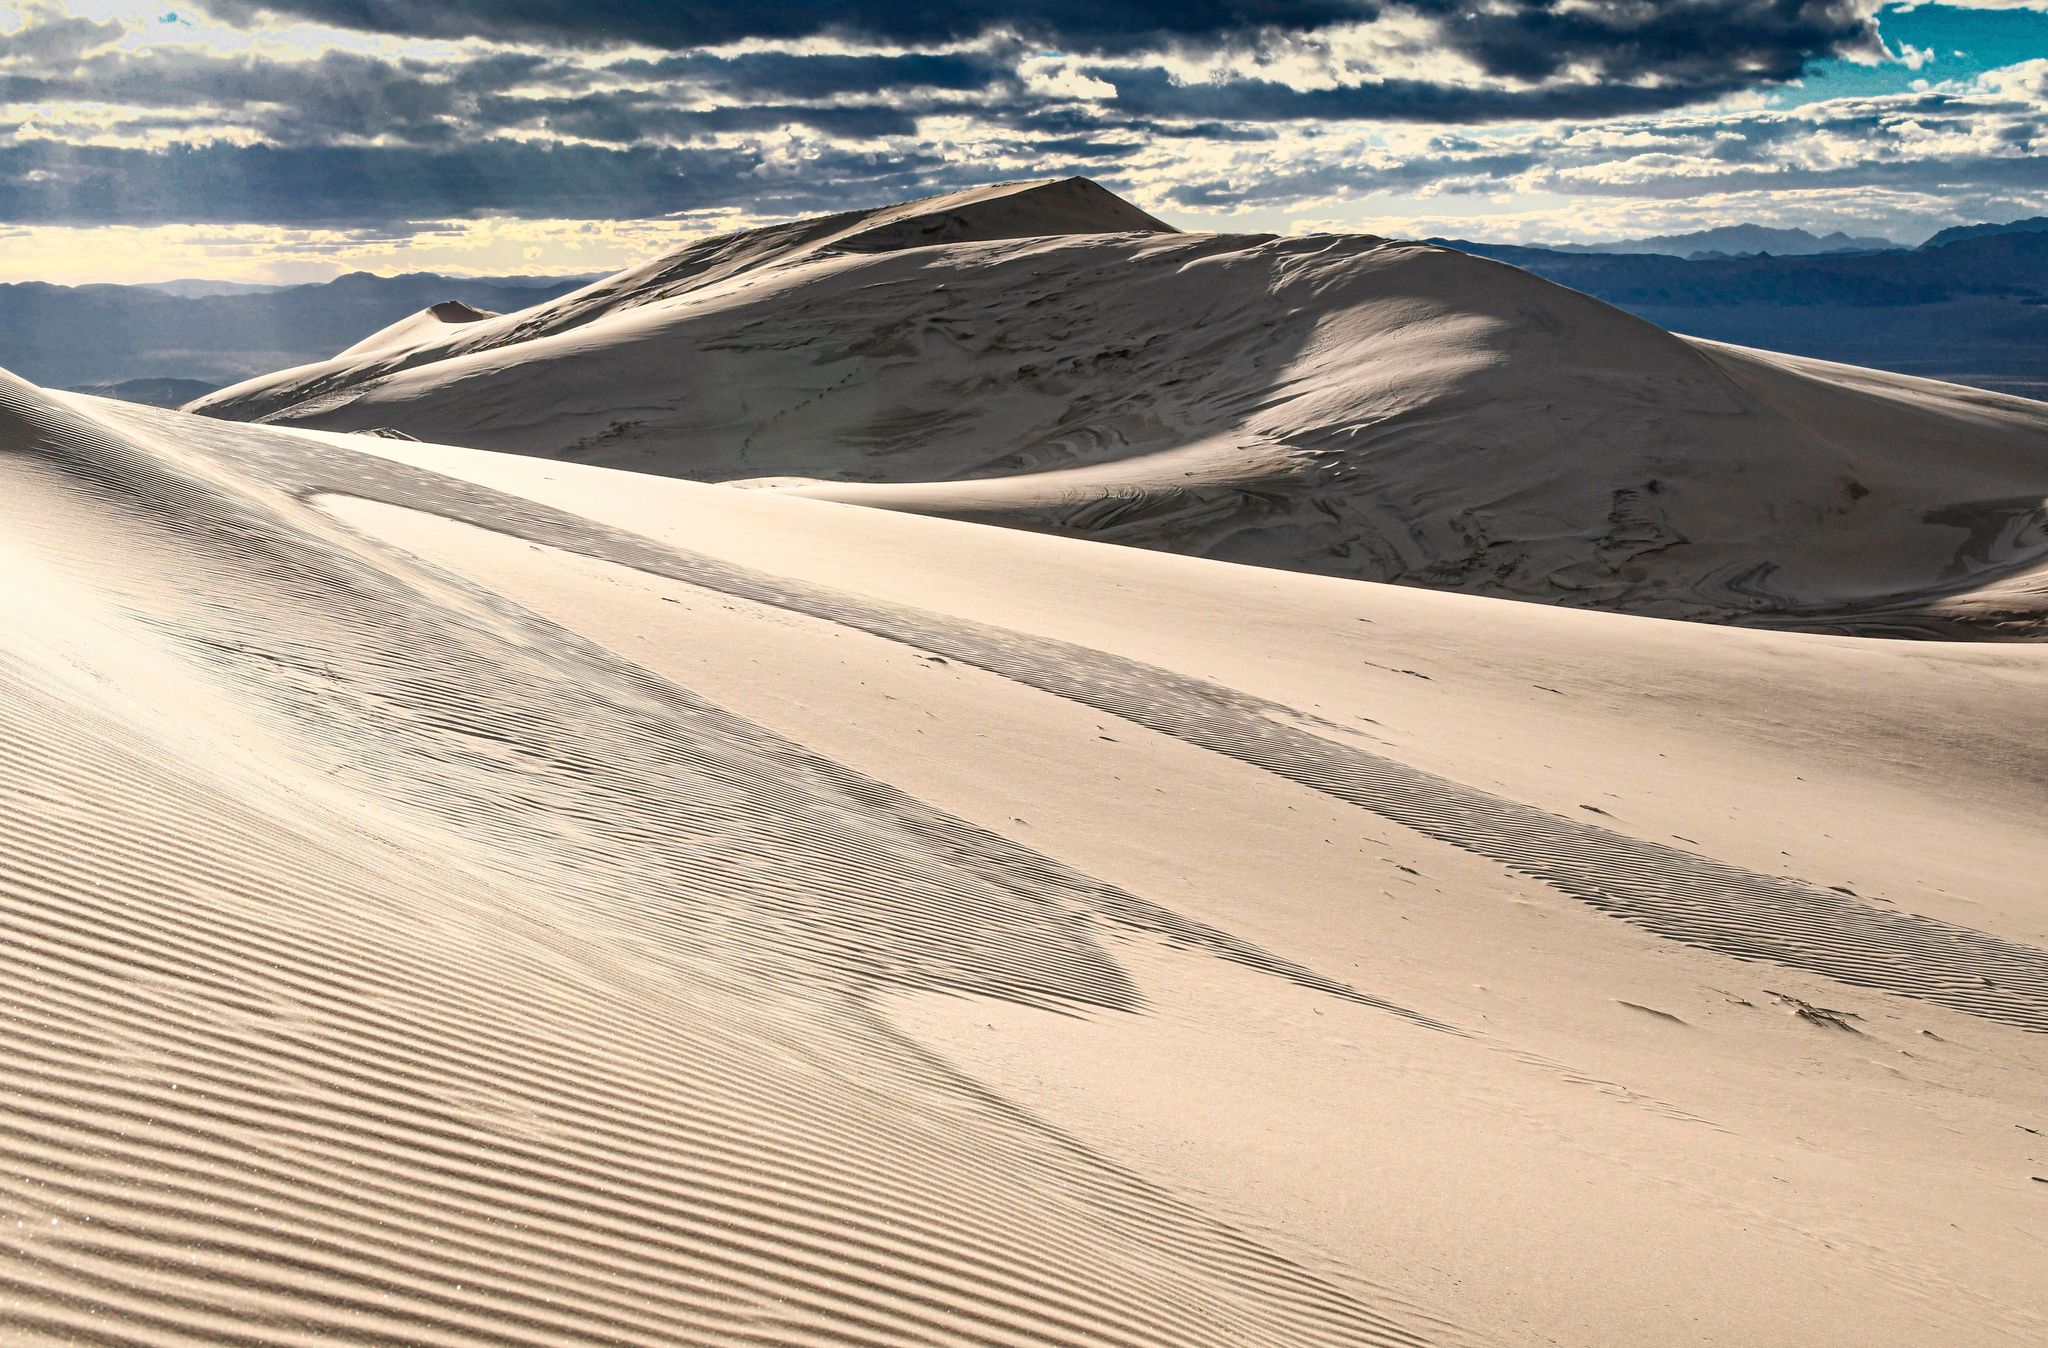 Kelso Dunes is the most popular hike at Mojave National Preserve.